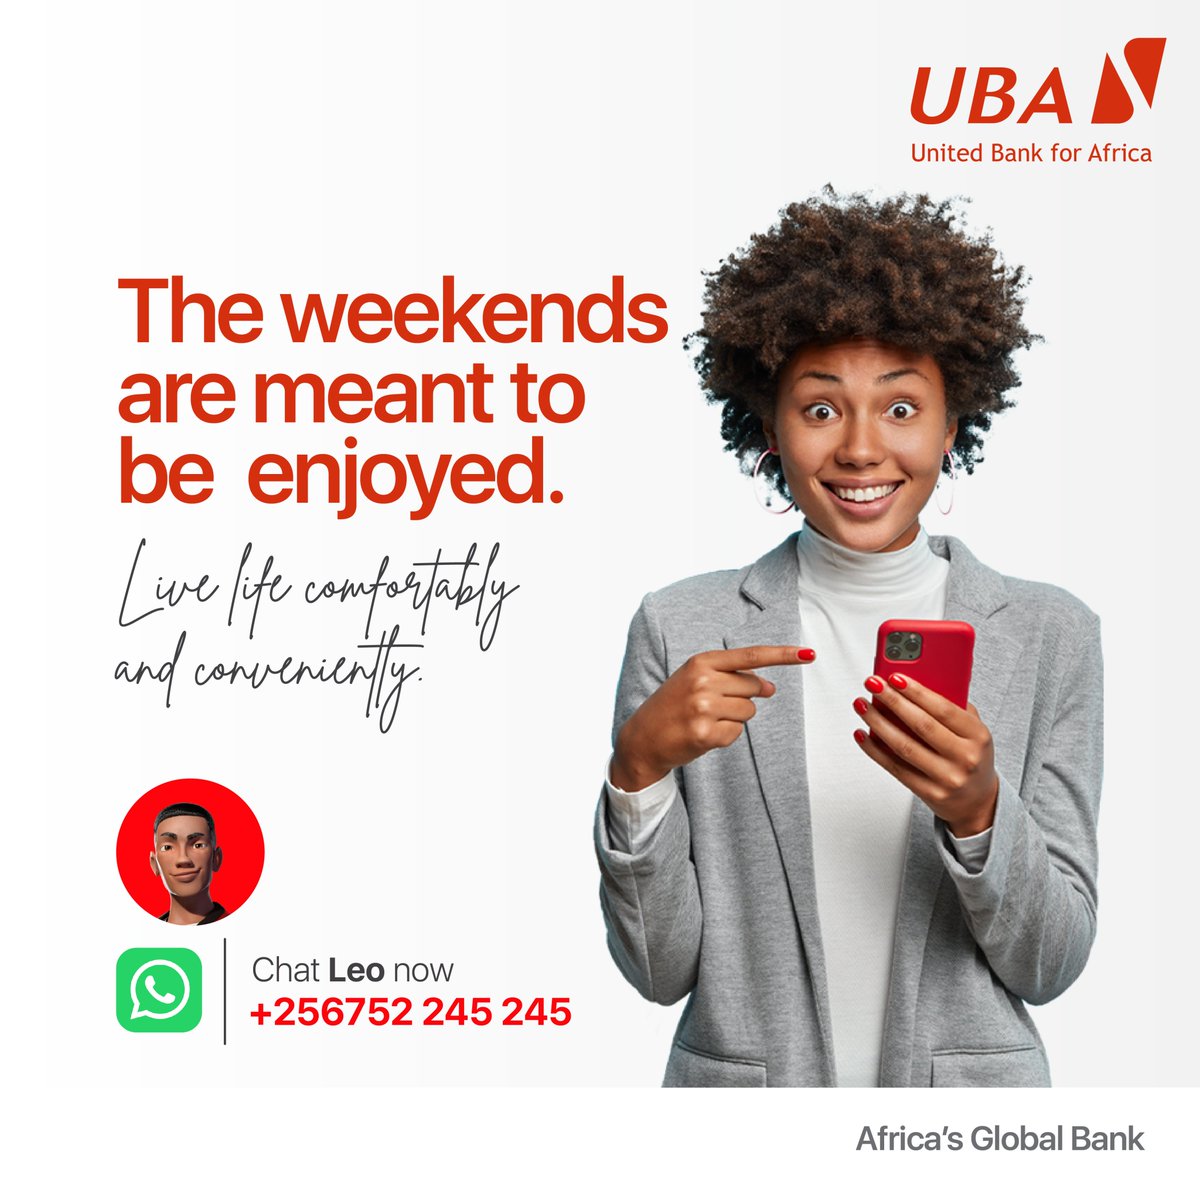 You don't have to leave the comfort of your home this weekend if you don't want to! 

Simply save +256752245245 to WhatsApp Leo and make transactions seamlessly.

 #LeoChatBanking #UBAChatBot #Leo #KingofBots #chatbot #AfricasGlobalBank